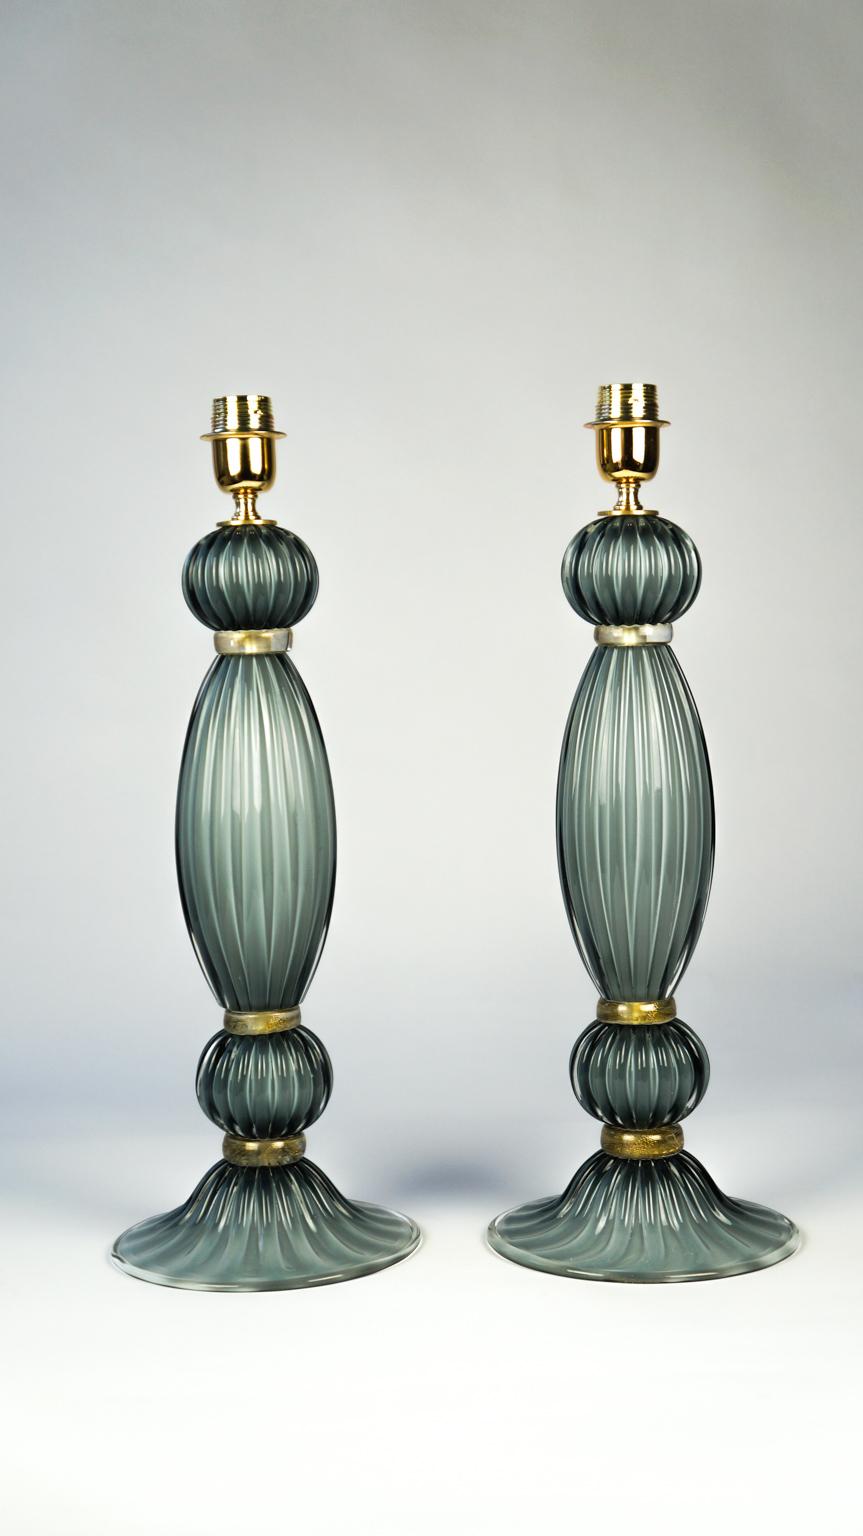 This lamp was designed in 1984 by Toso Murano. It is composed of two blown spheres, which enclose a central 